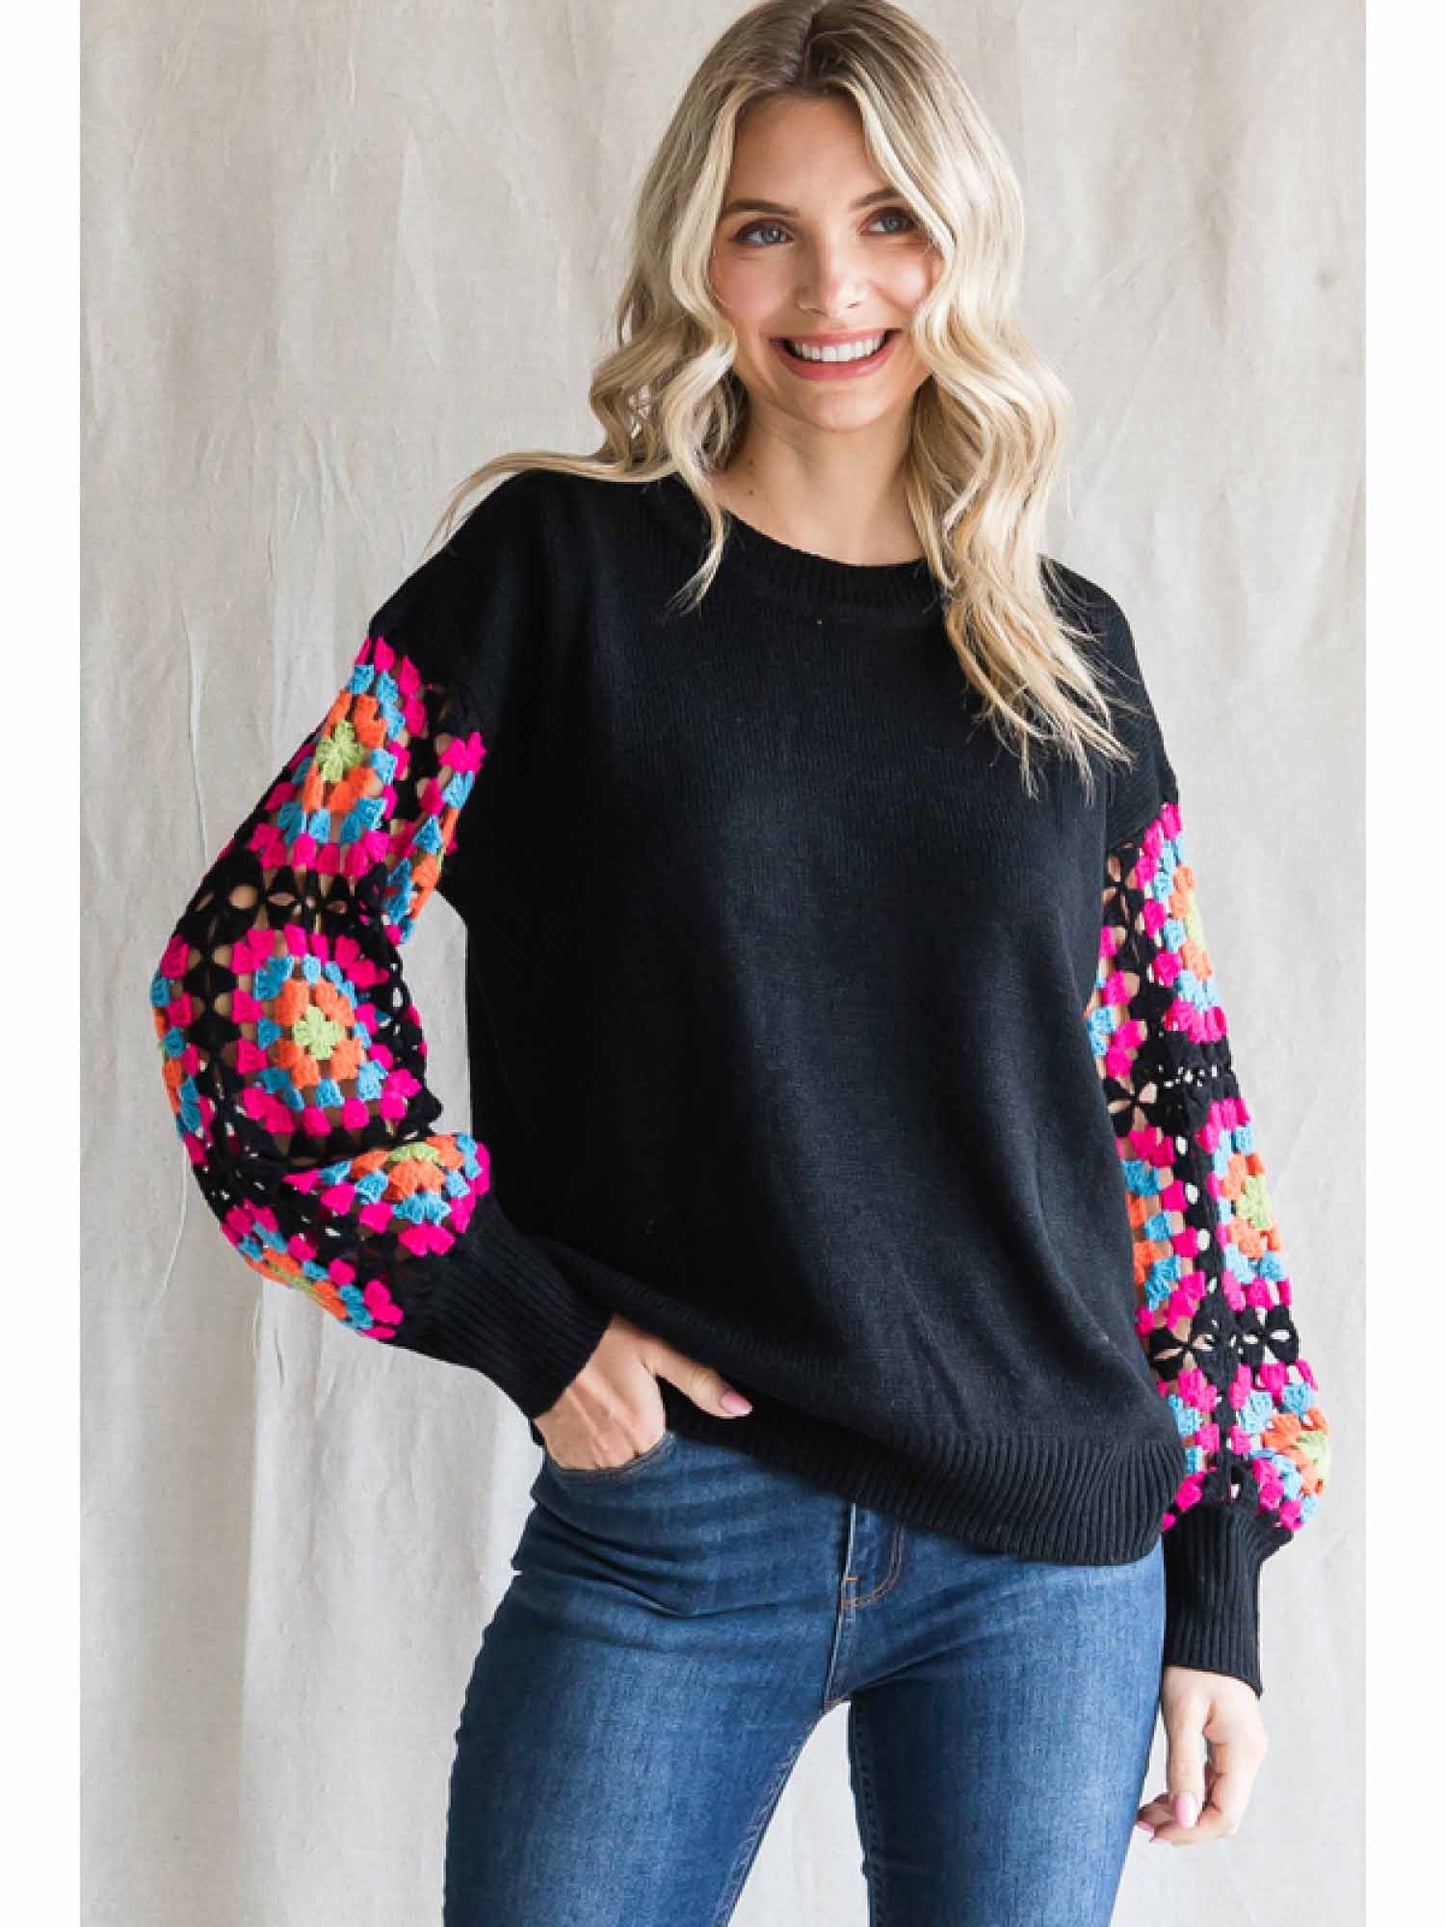 Knit Black Pullover Sweater by Jodifl